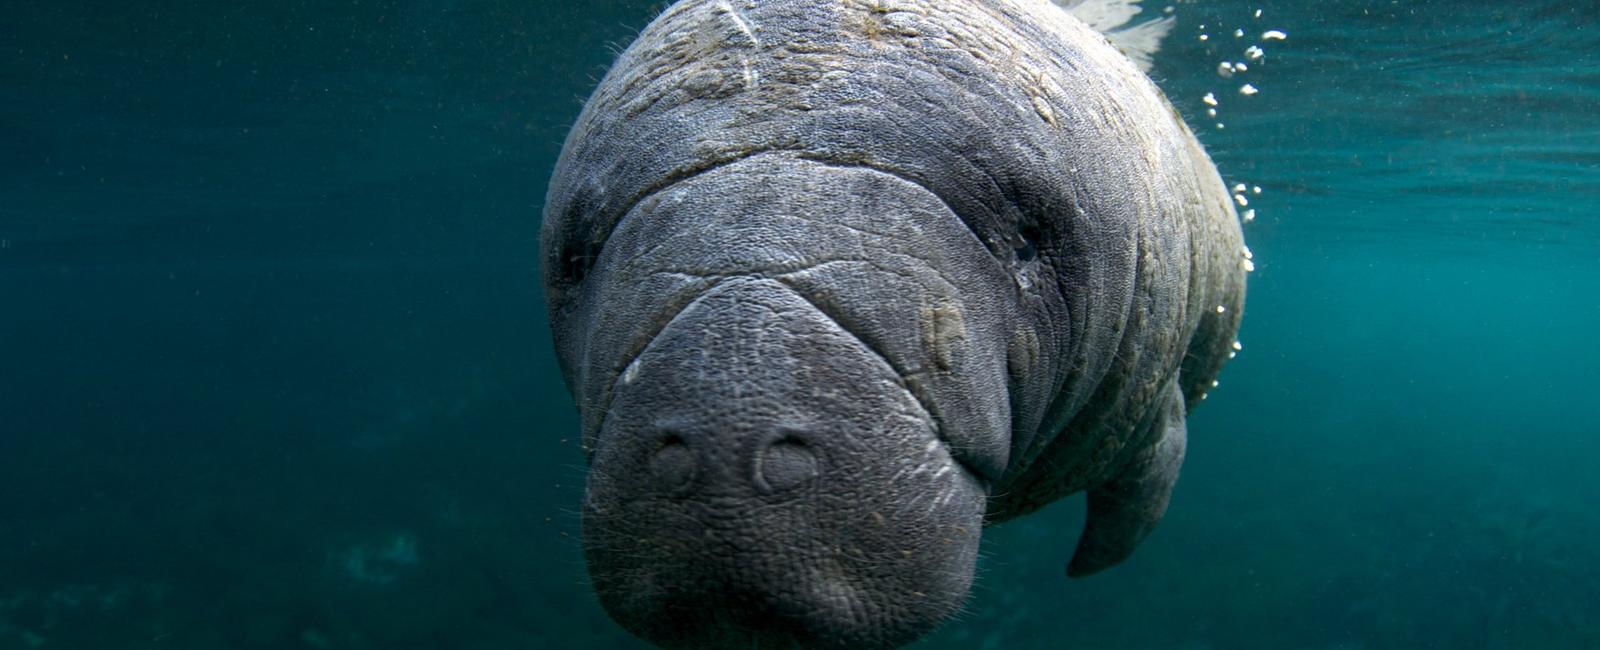 Manatees can control their buoyancy by farting